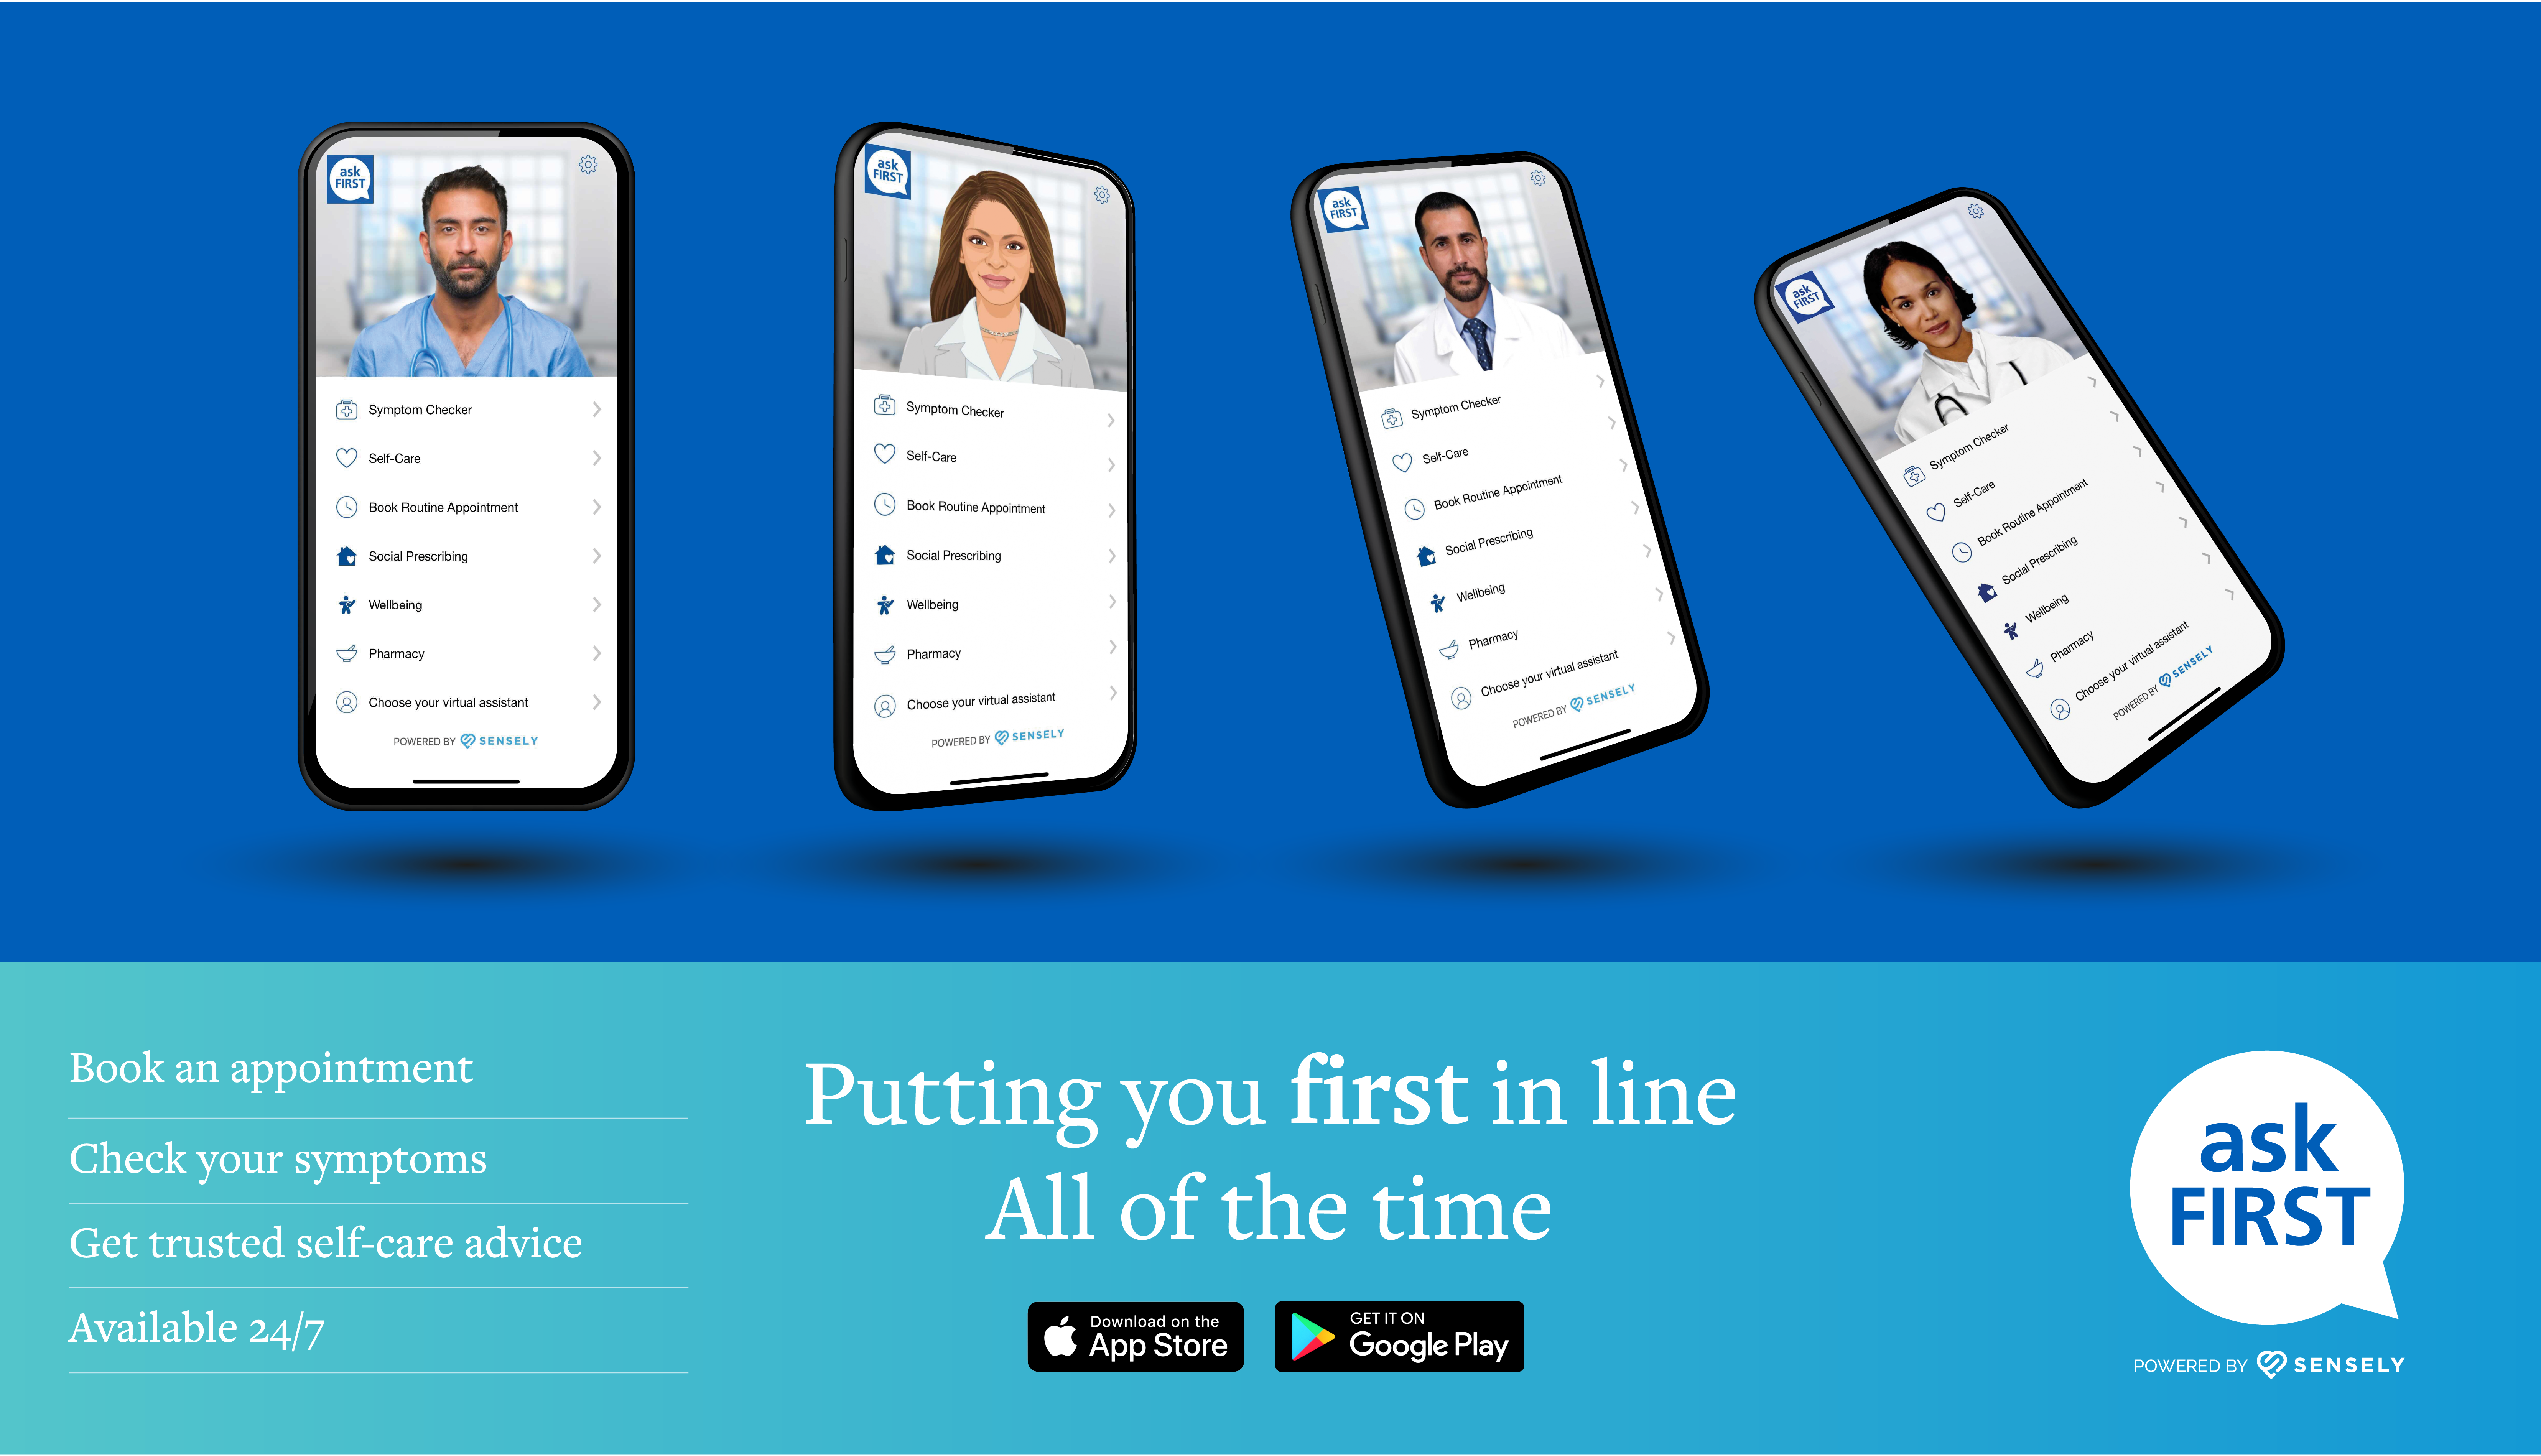 Ask First Putting you first in line all of the time book an appointment check your symptoms get trusted self care advice available 24 7 download on the app store or get it on google